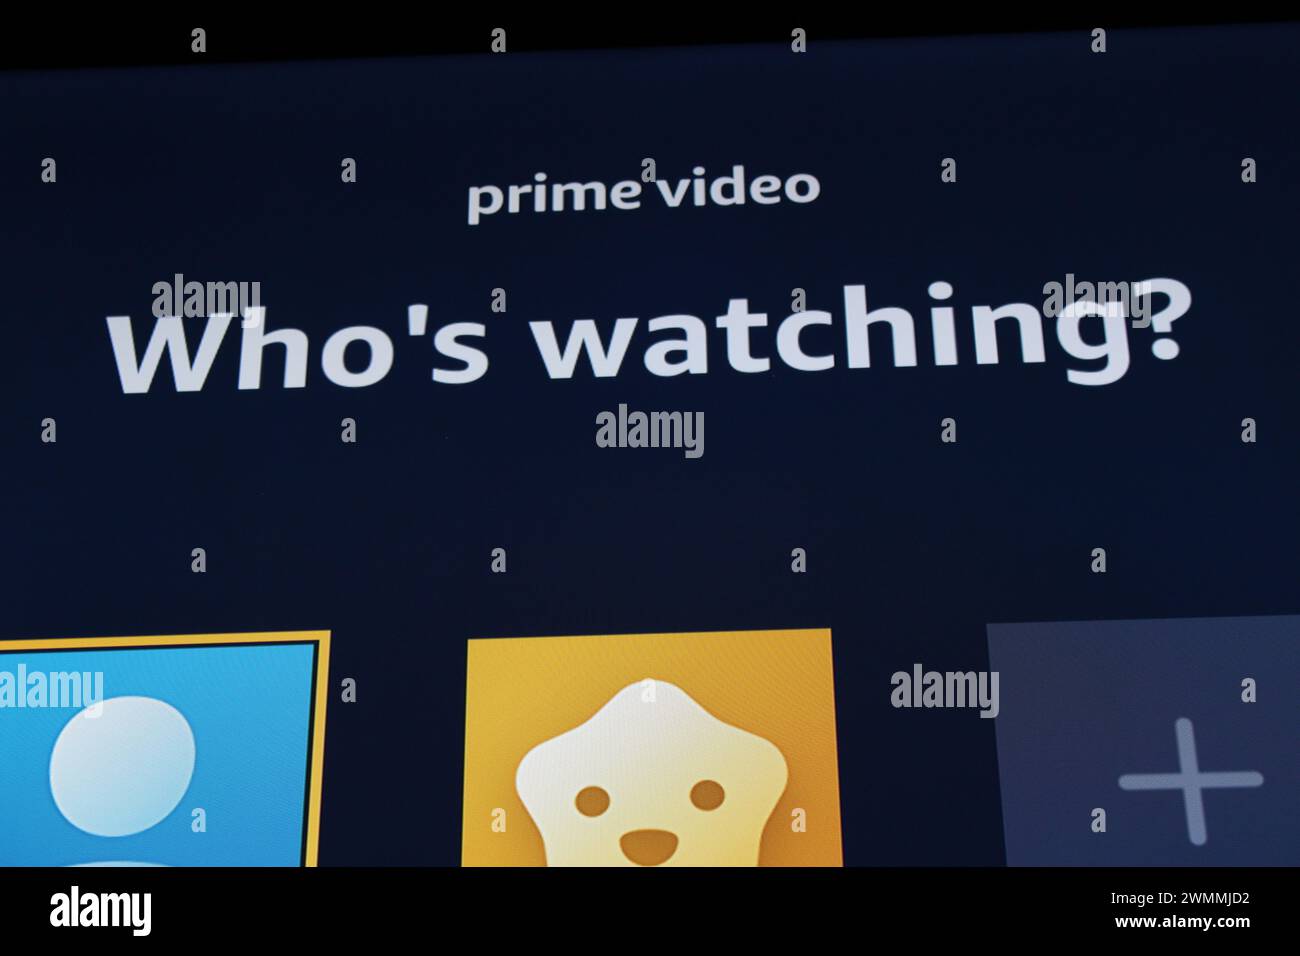 Amazon prime Prime video home screen asking who's watching. Graphic resource, concept for streaming at home Stock Photo